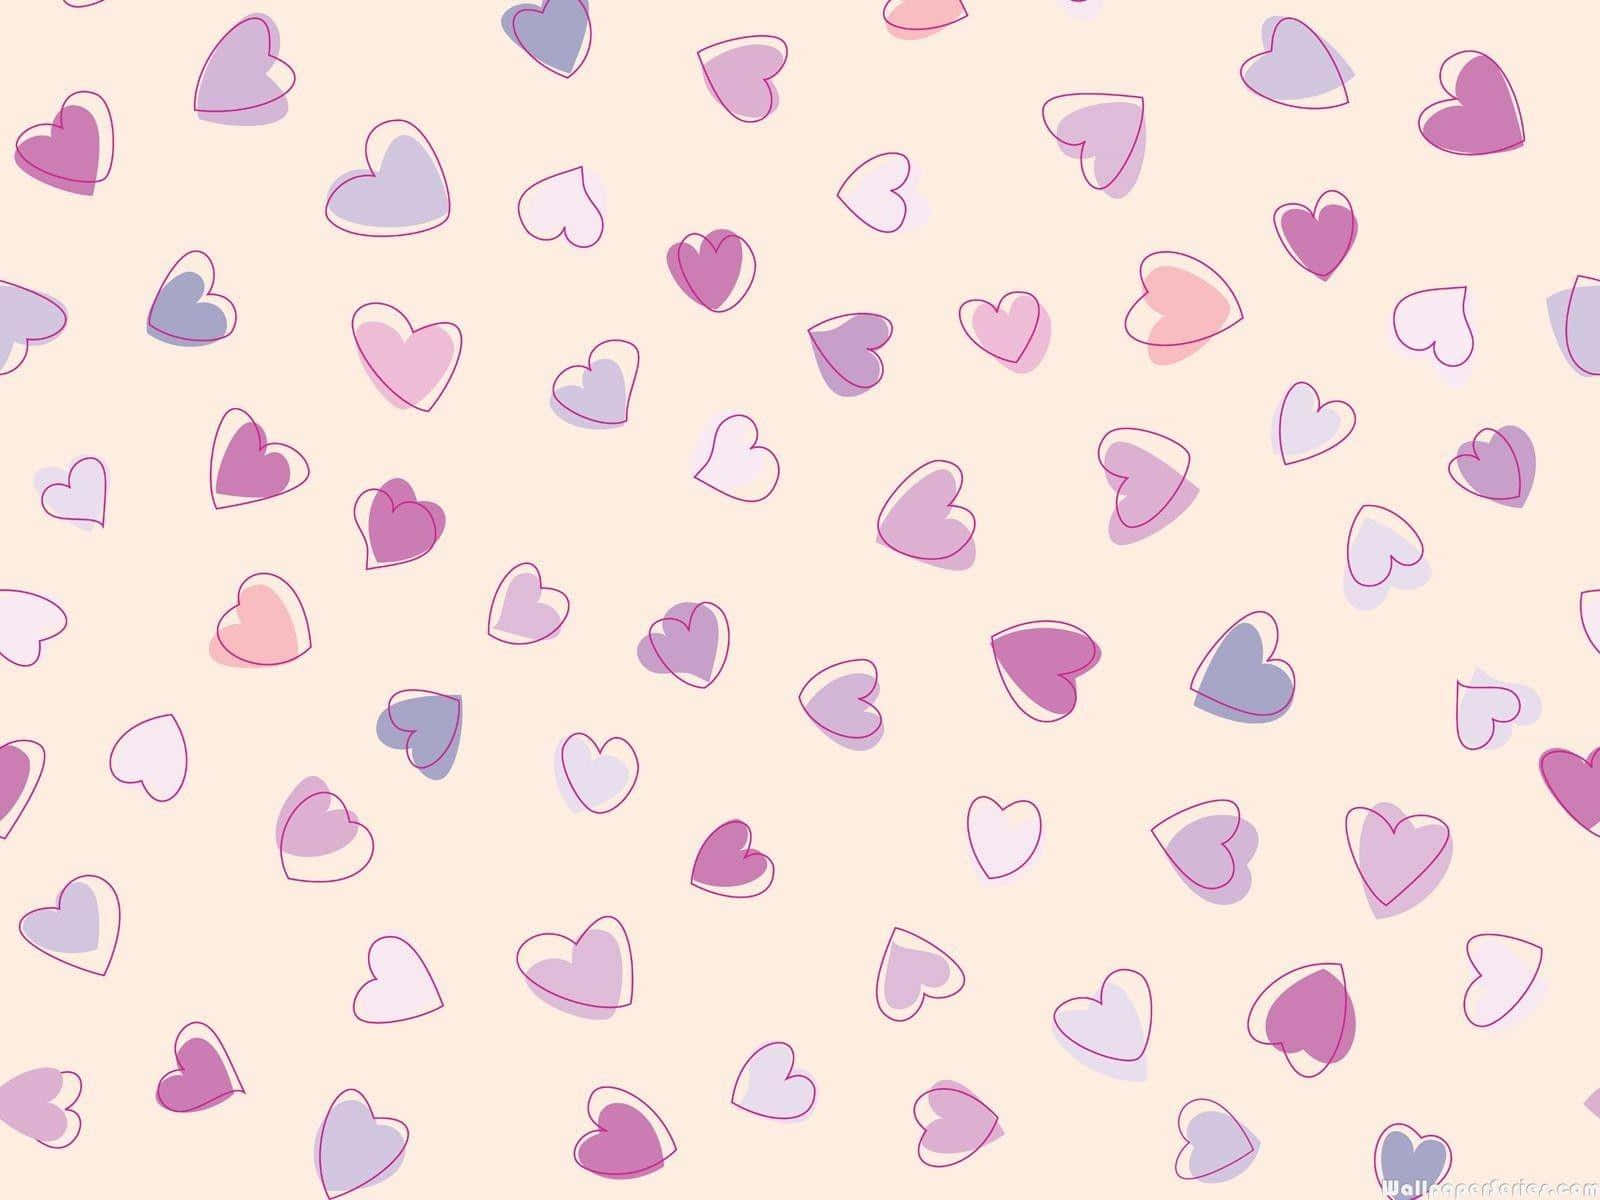 A Vivid Red Cartoon Heart on a Vibrant Background Wallpaper